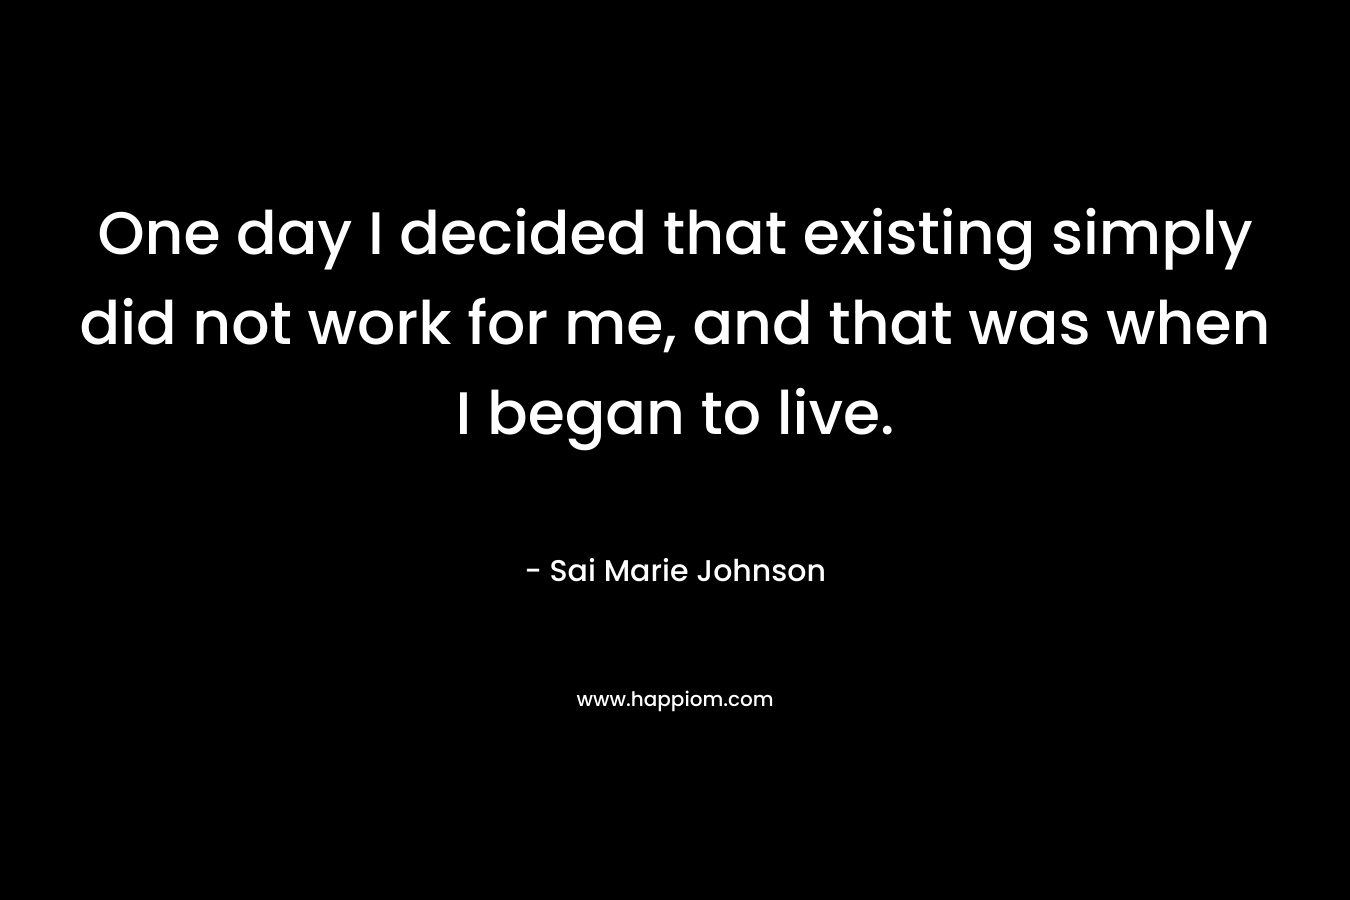 One day I decided that existing simply did not work for me, and that was when I began to live. – Sai Marie Johnson